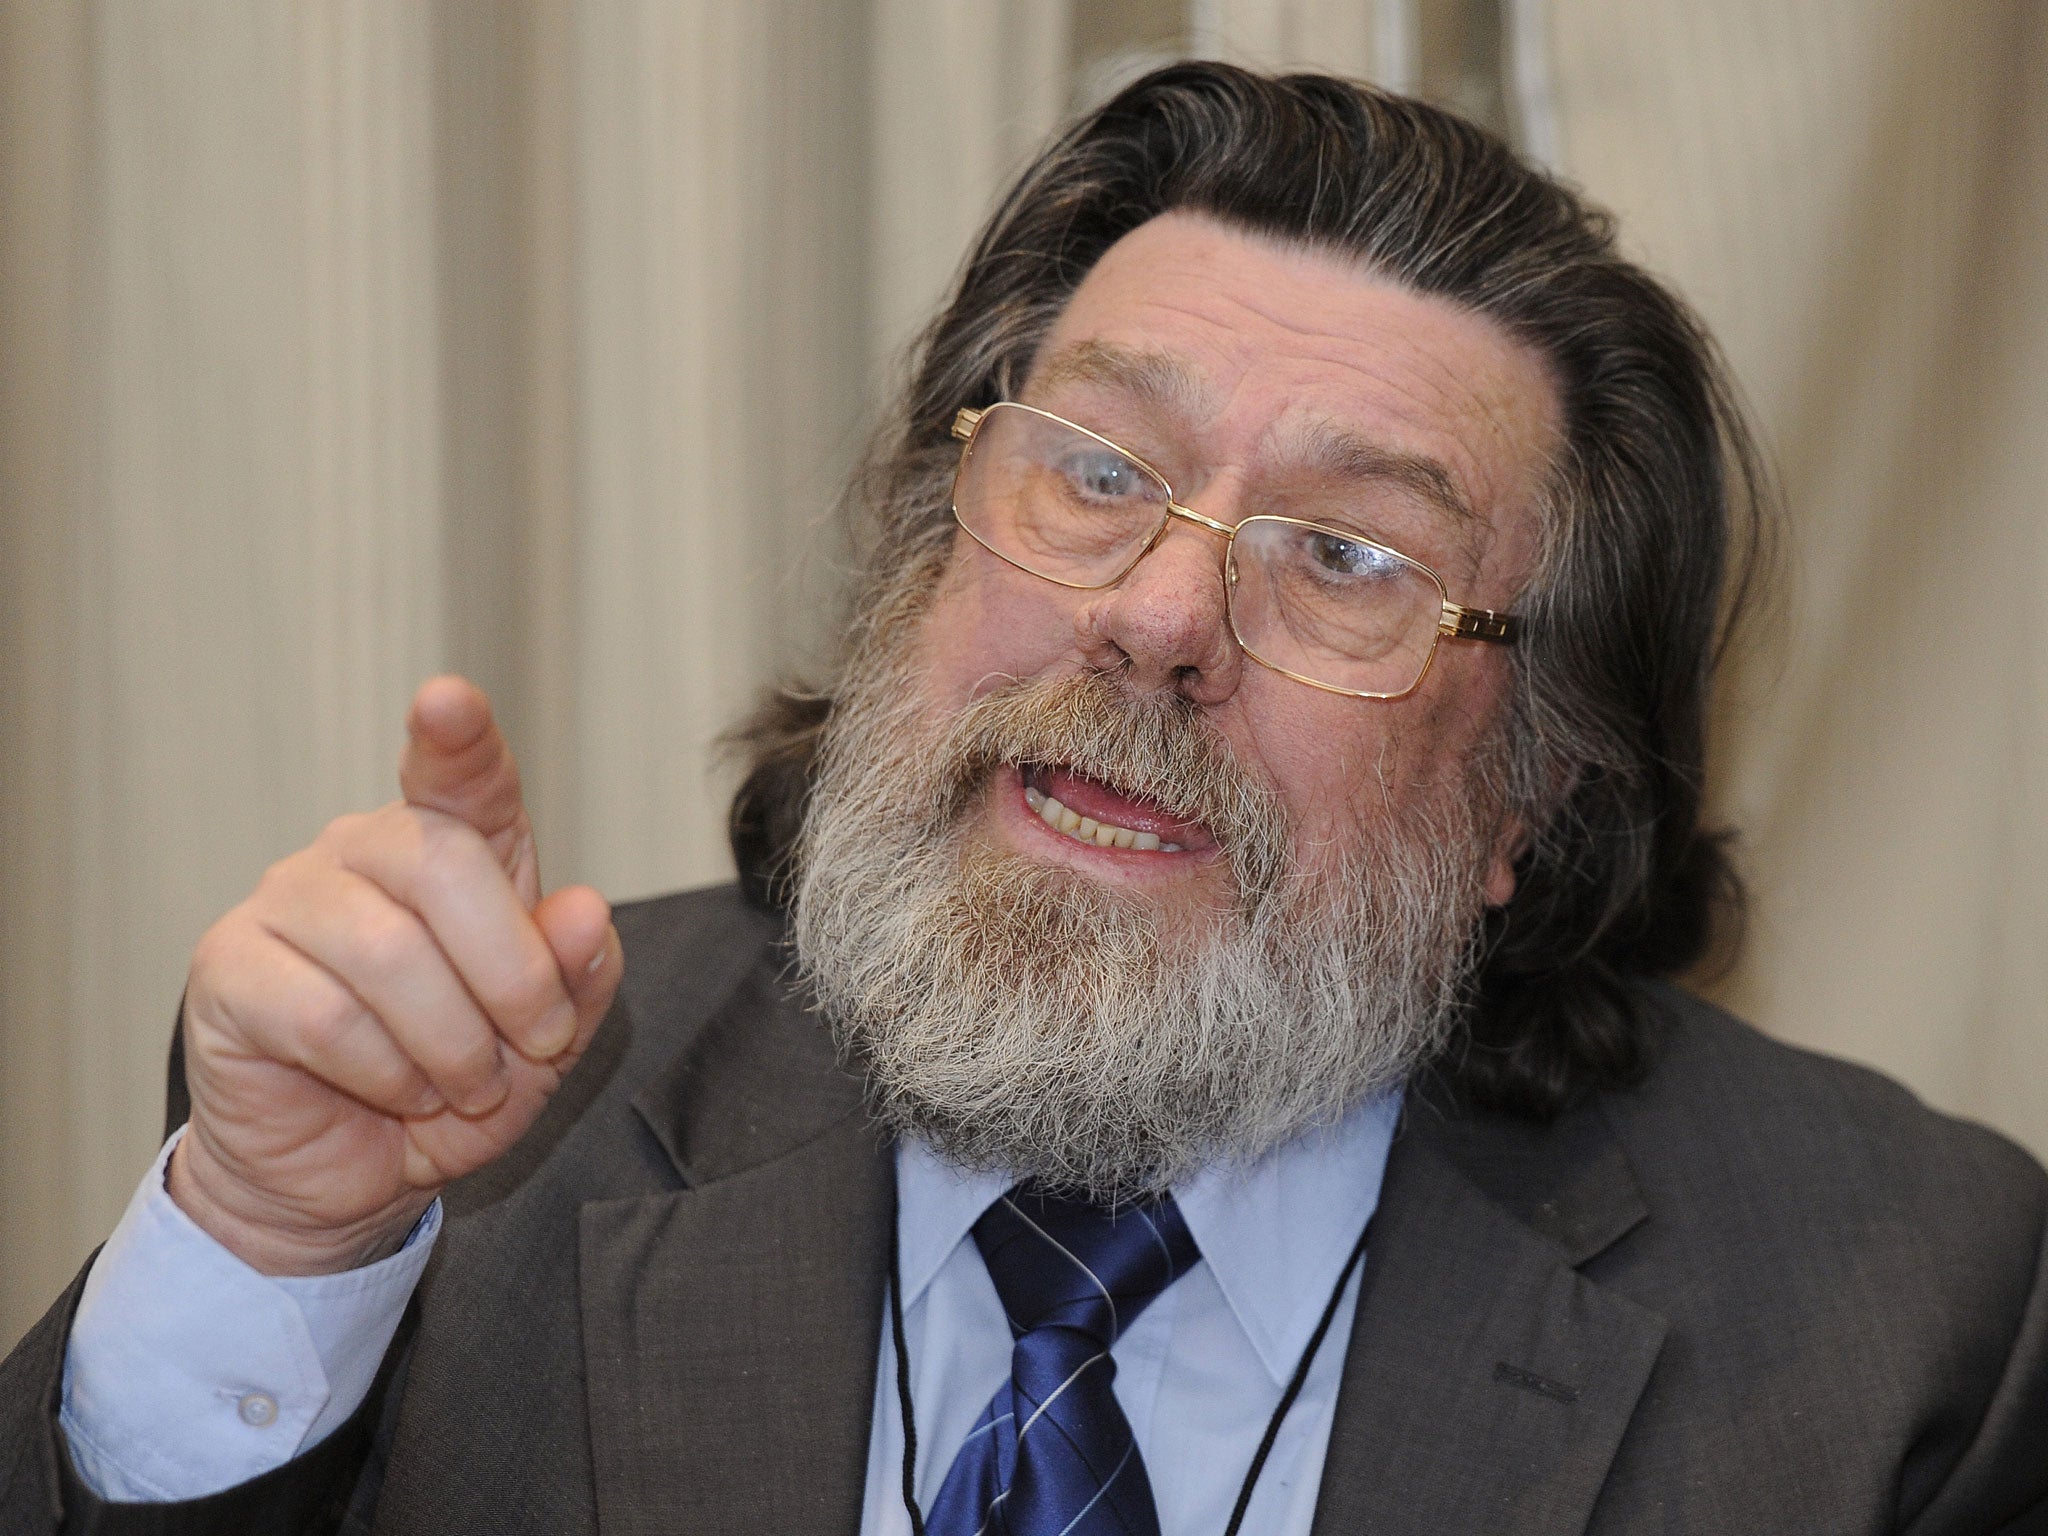 Actor Ricky Tomlinson addresses a press conference to raise awareness for the campaign for justice for the Shrewsbury 24